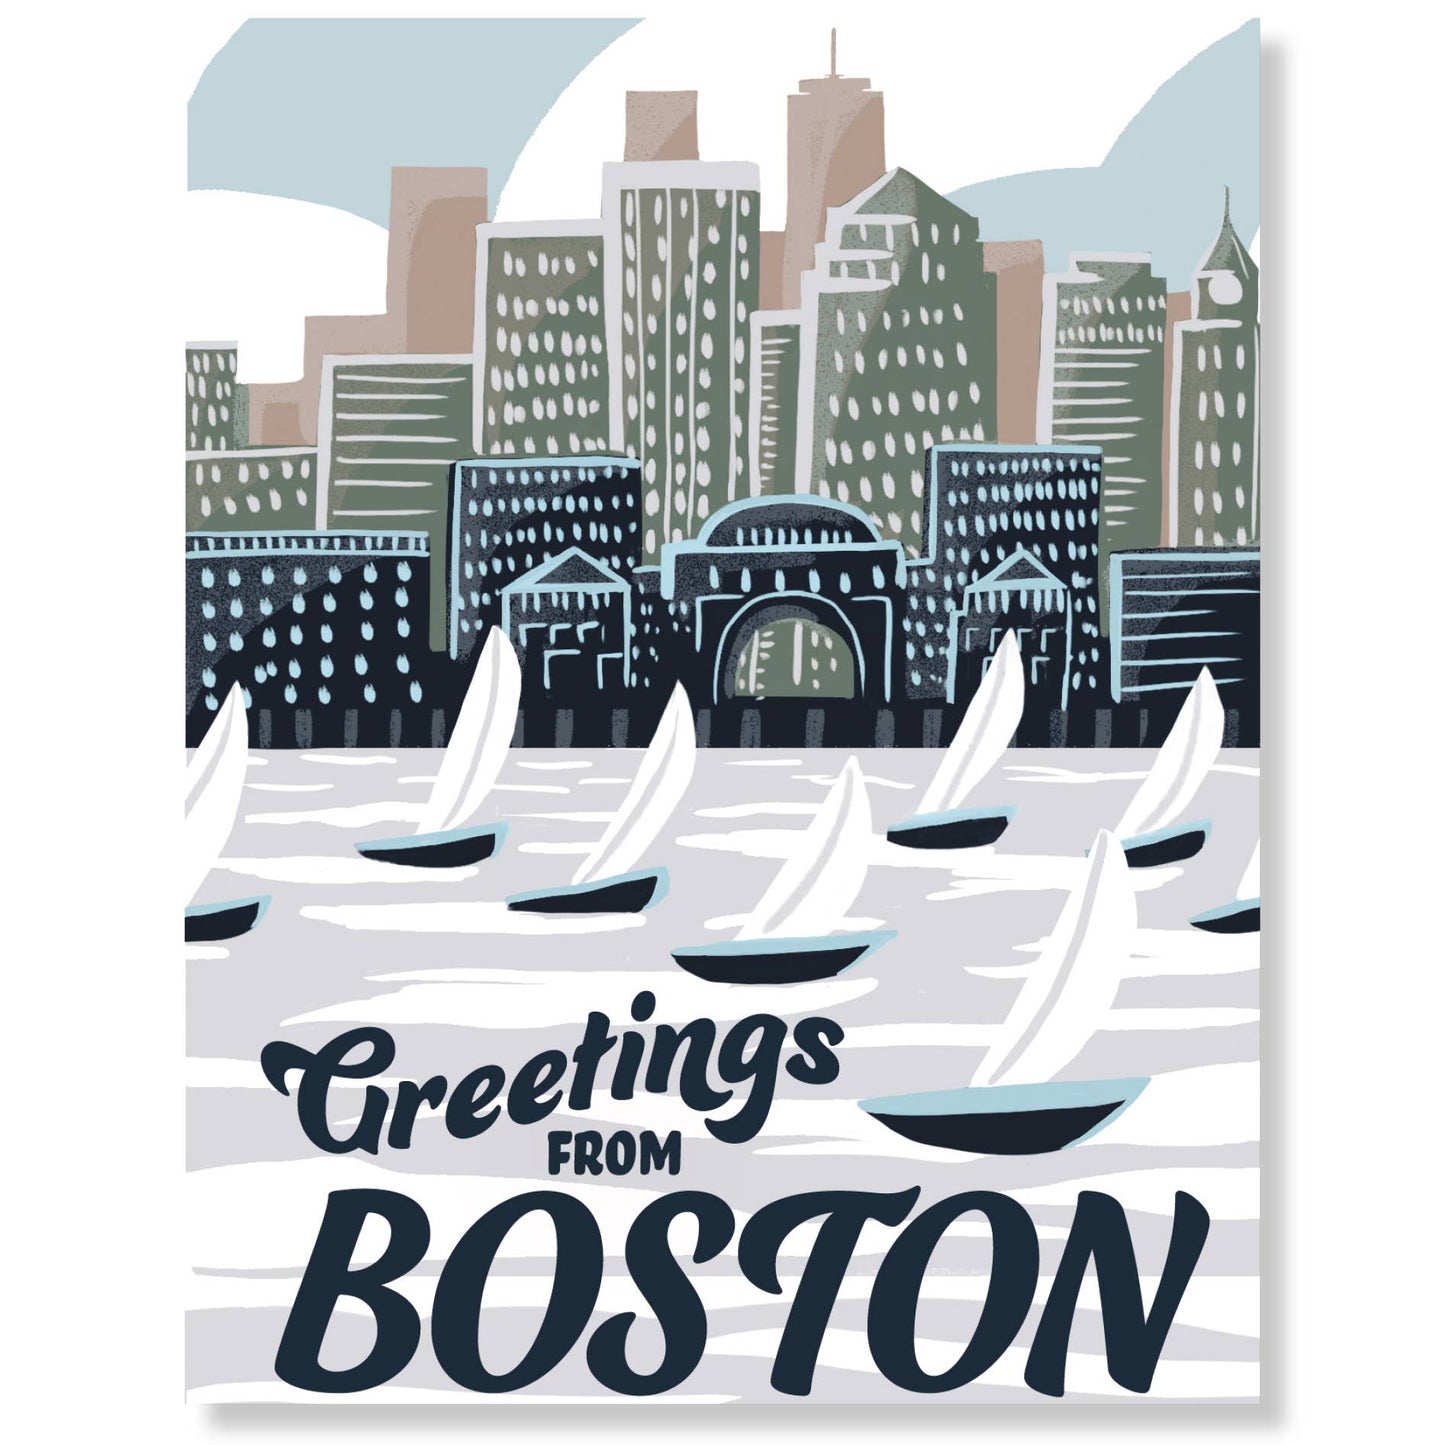 Greetings from Boston Greeting Card